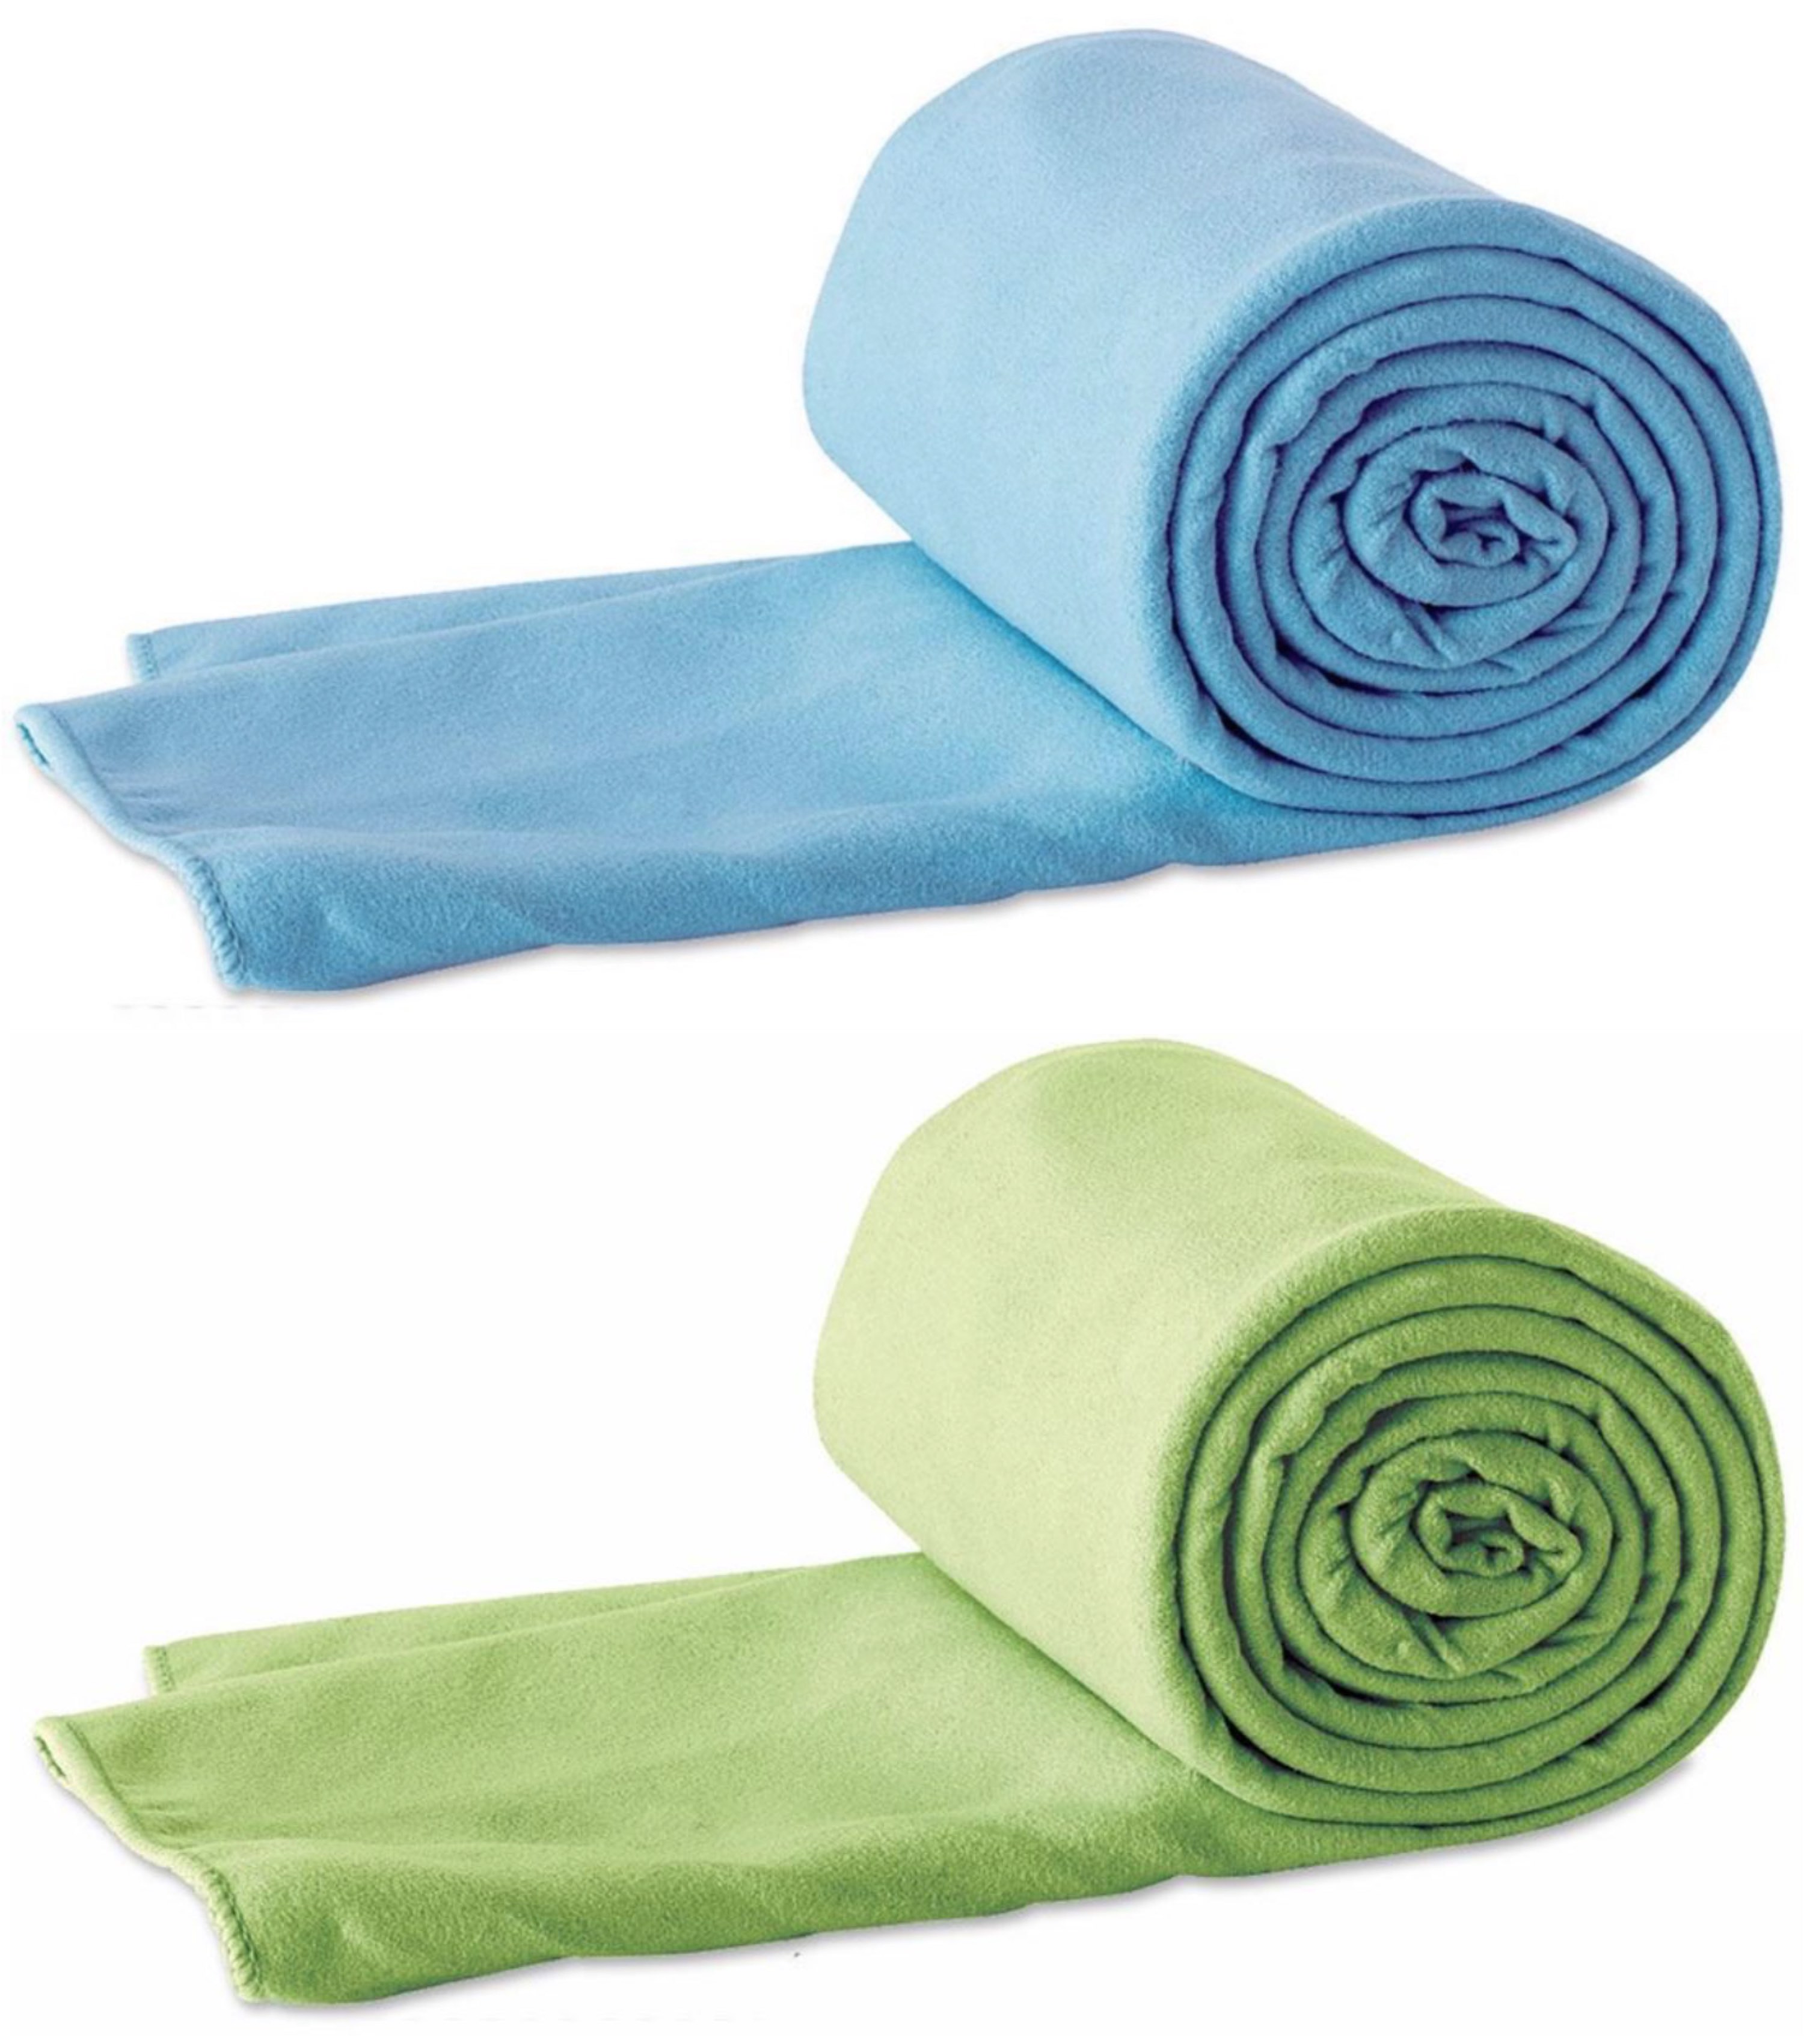 360 Degrees Compact Microfibre Towel - Large by 360 Degrees Travel &  Outdoor Gear (Compact-Microfibre-Towel-Large-360-Degrees)